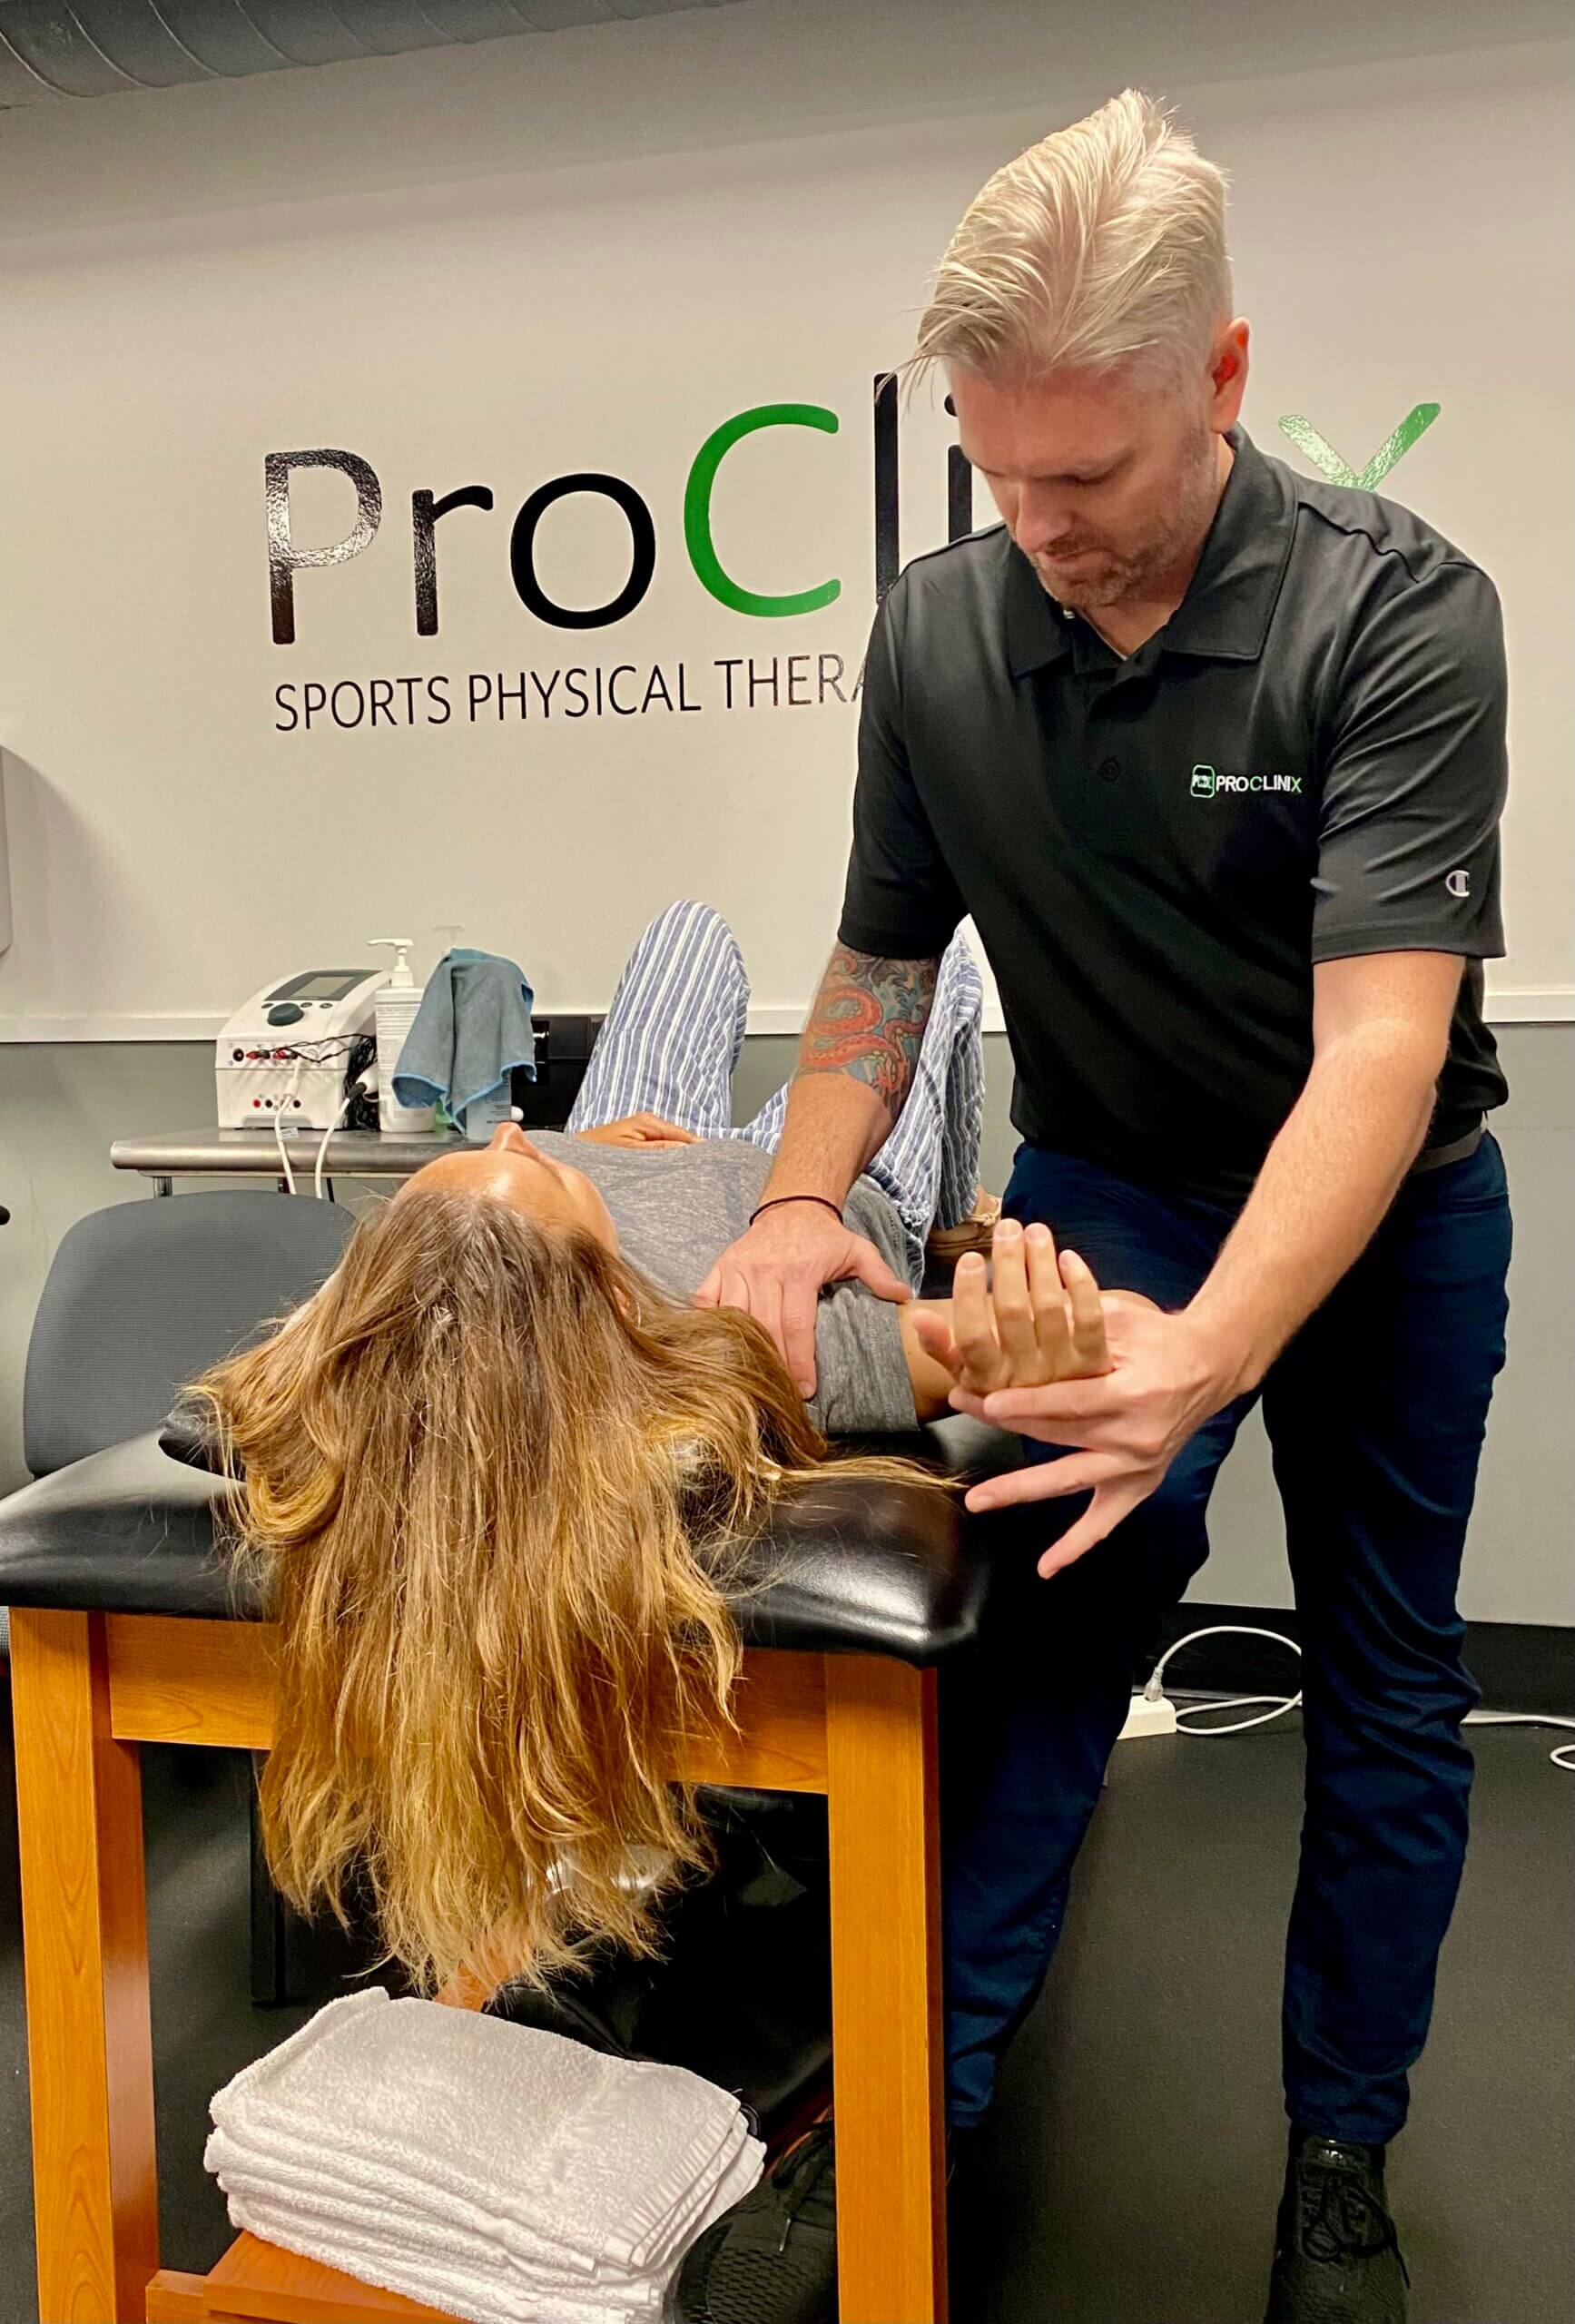 ProClinix-Sports-Physical-Therapy-Chiropractic-Dan-Bogart-PT-MS-providing-joint-mobilization-to-improve-shoulder-pain-and-mobility-scaled.jpg